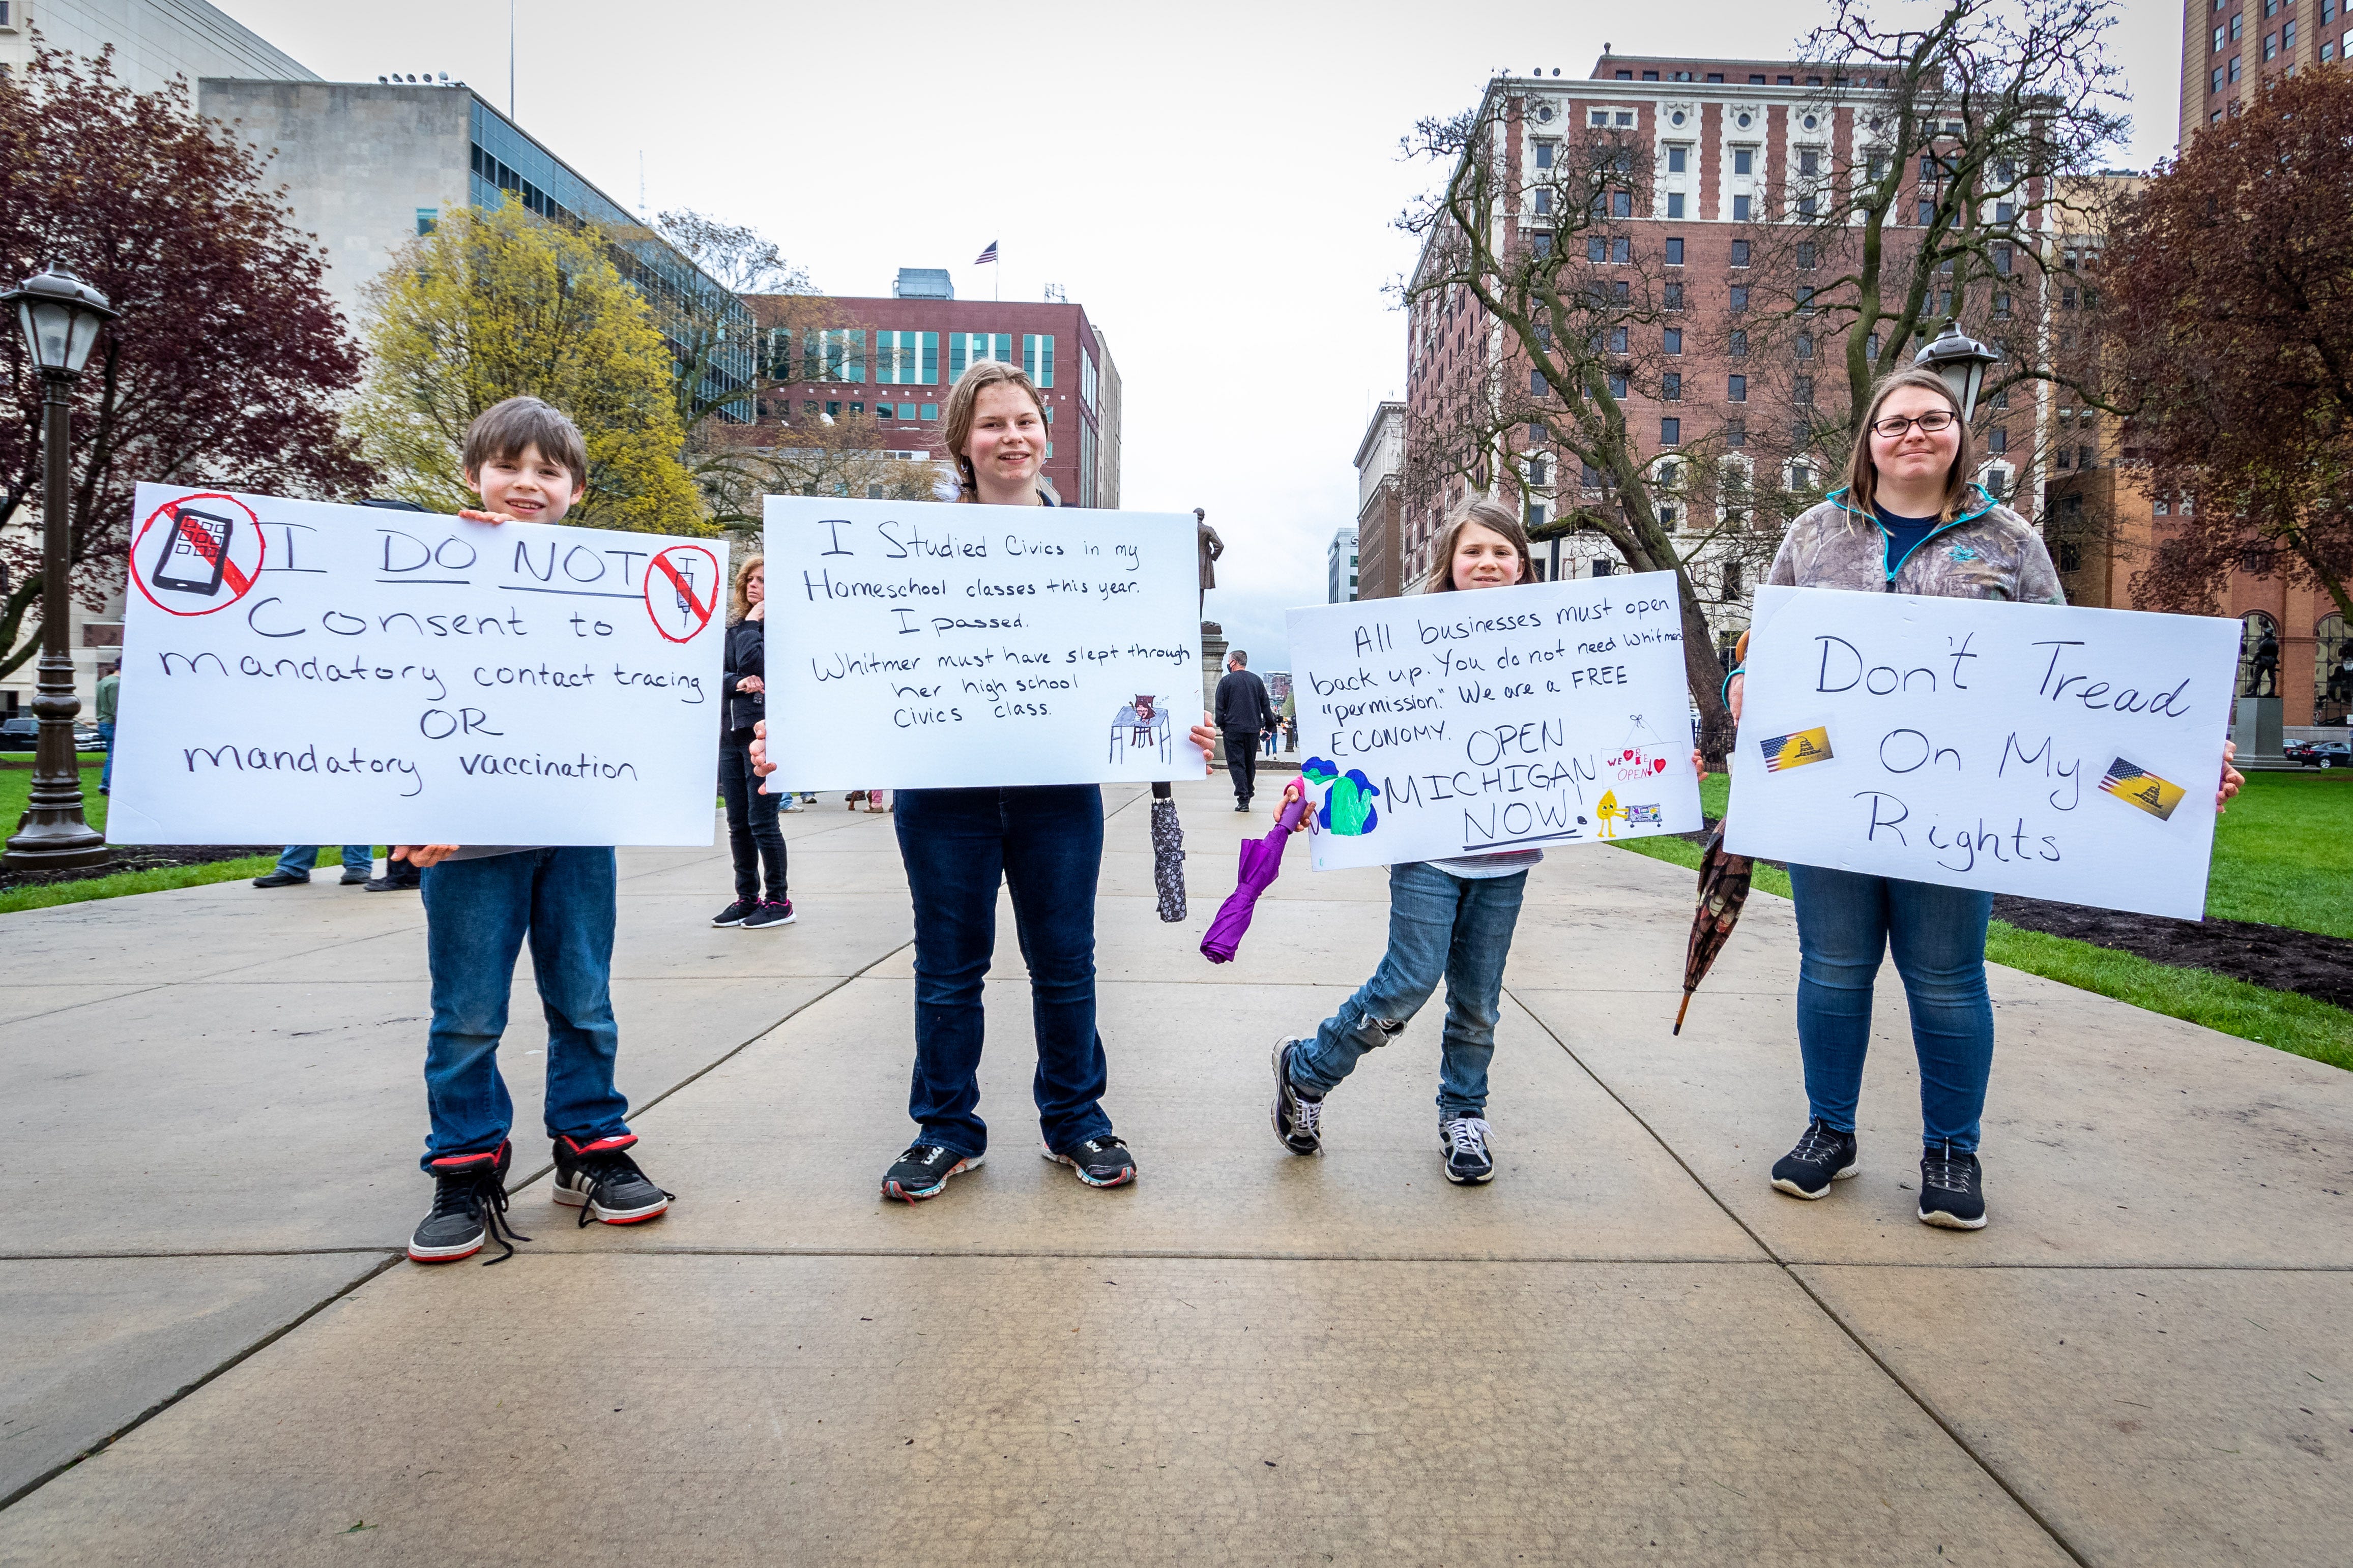 The Dickens family from left to right;  Ethan, 11, Alexis, 15,
Charlotte, 9, and their mother Melissa from Hillsdale County joined the protest.